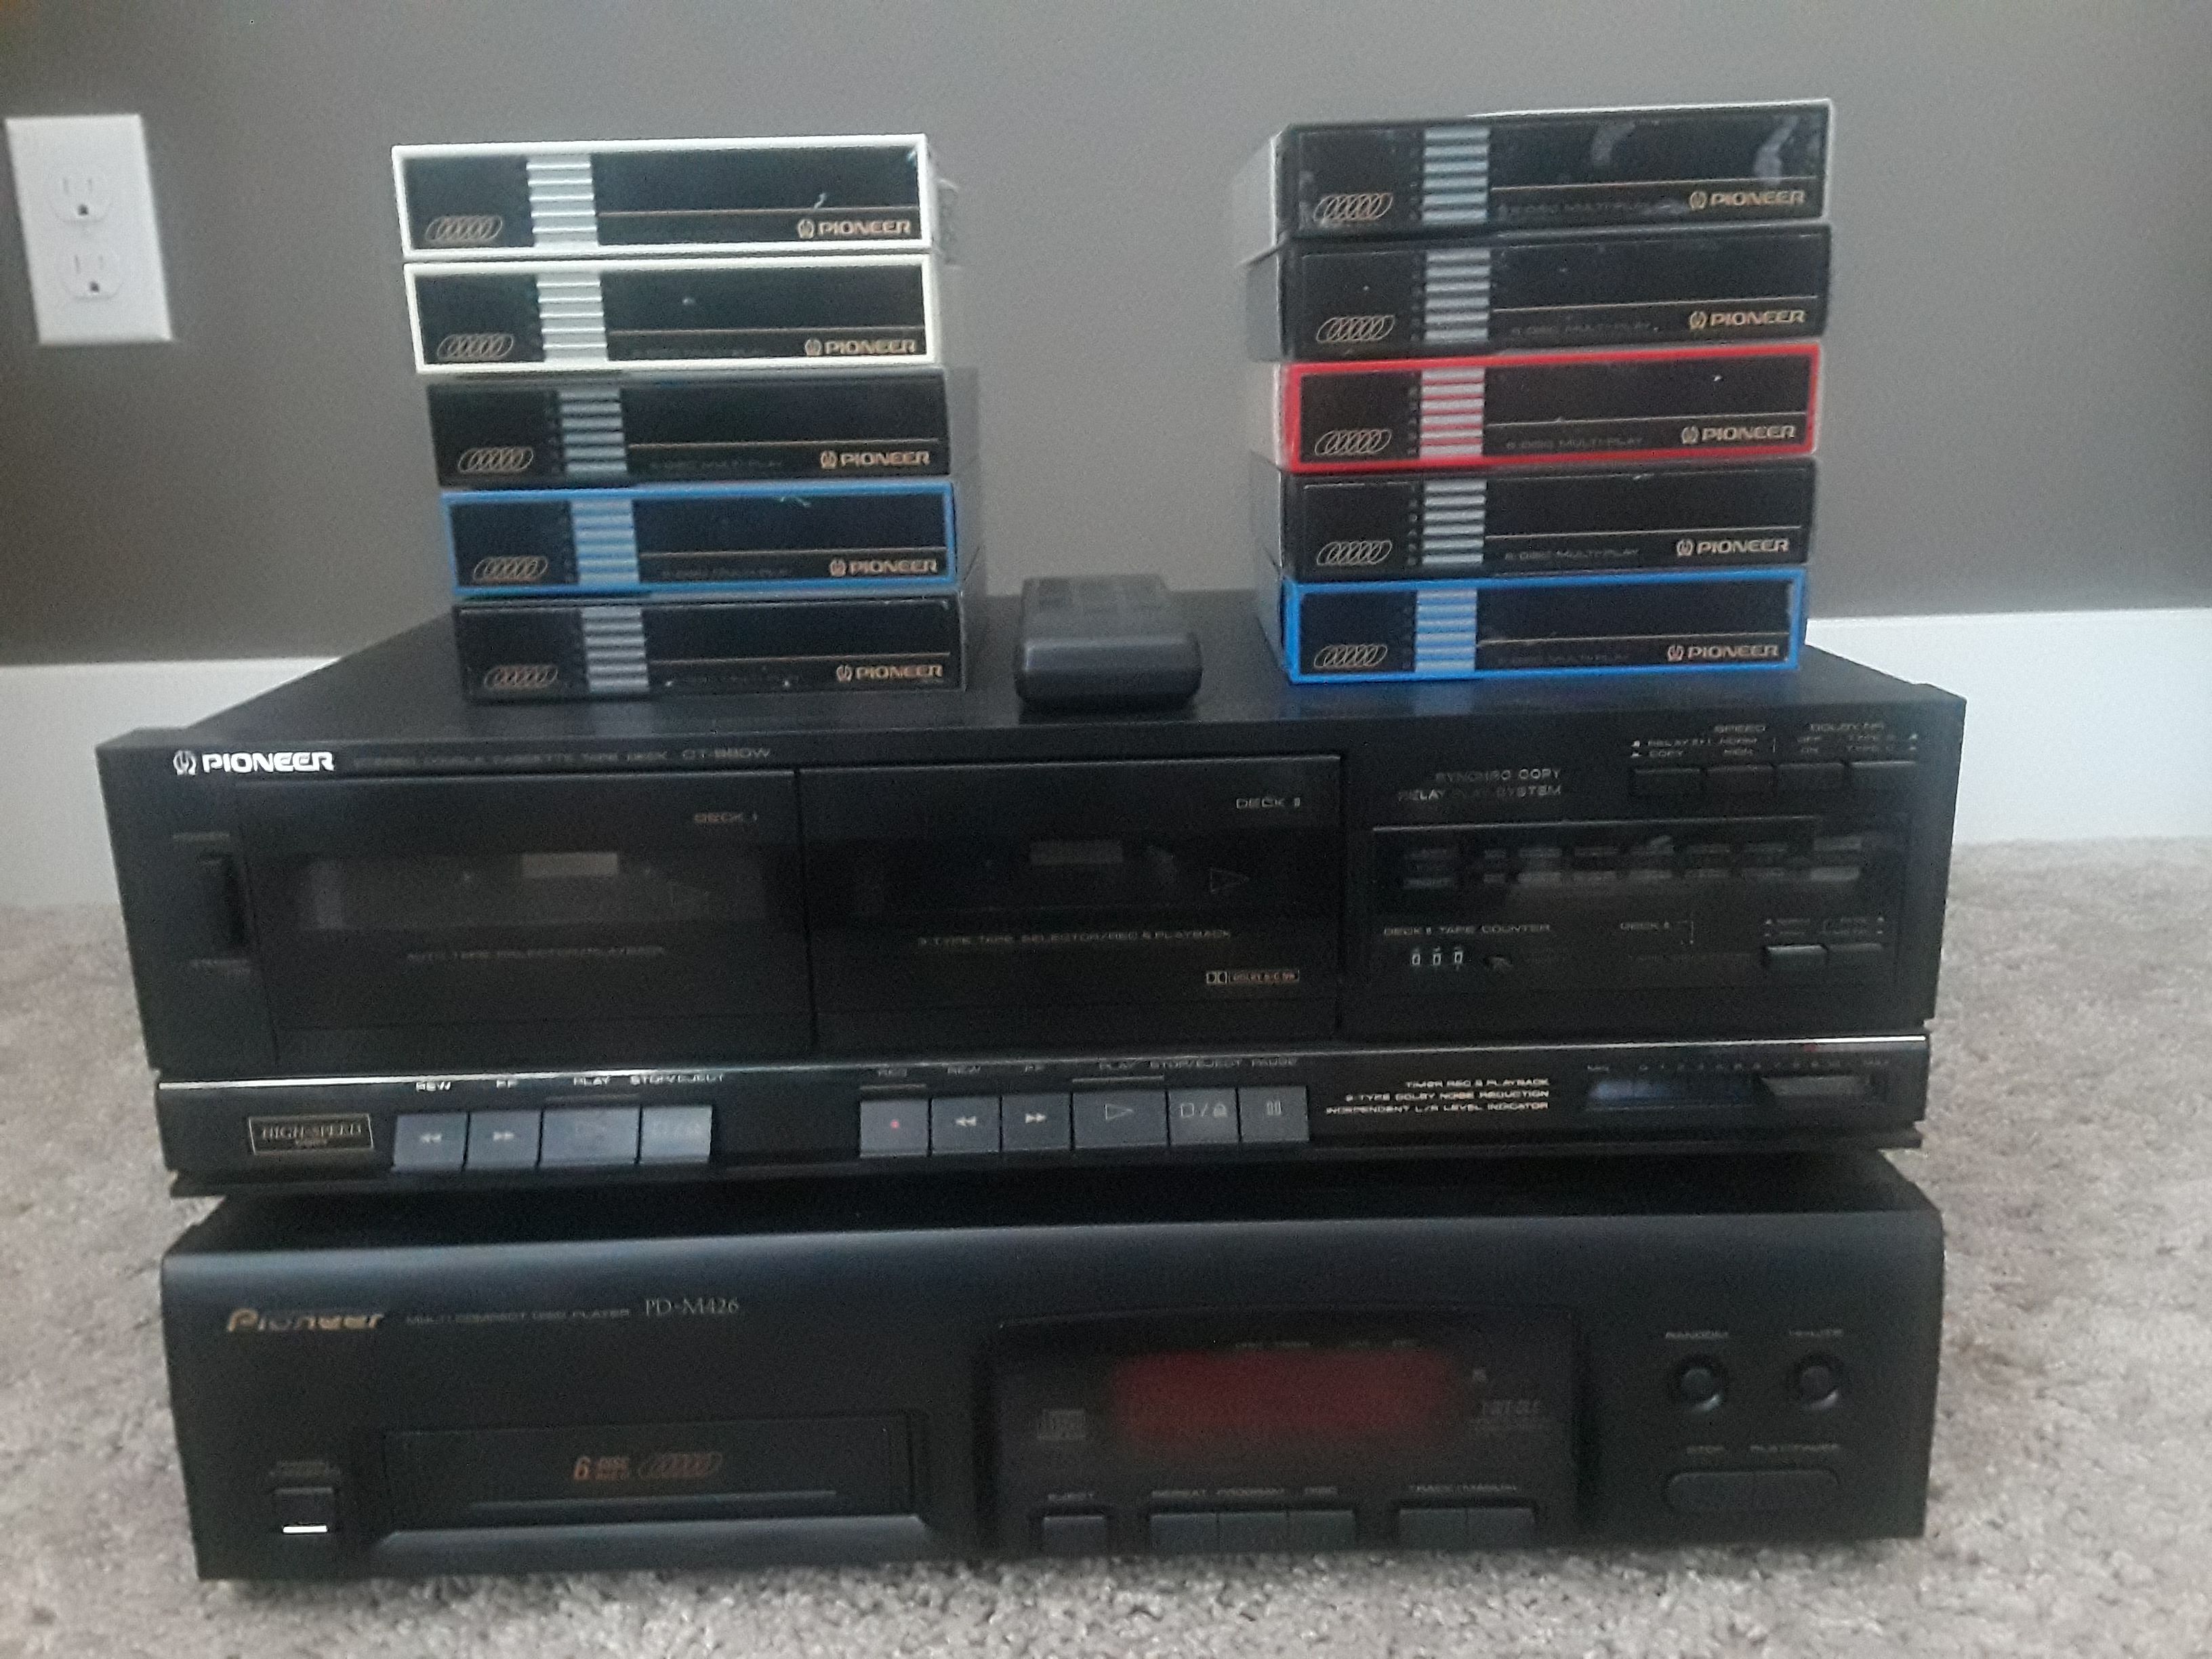 Pioneer PD-M426 6-Disc Magazine CD Player and Pioneer Stereo Double Cassette Tape Deck CT-980W